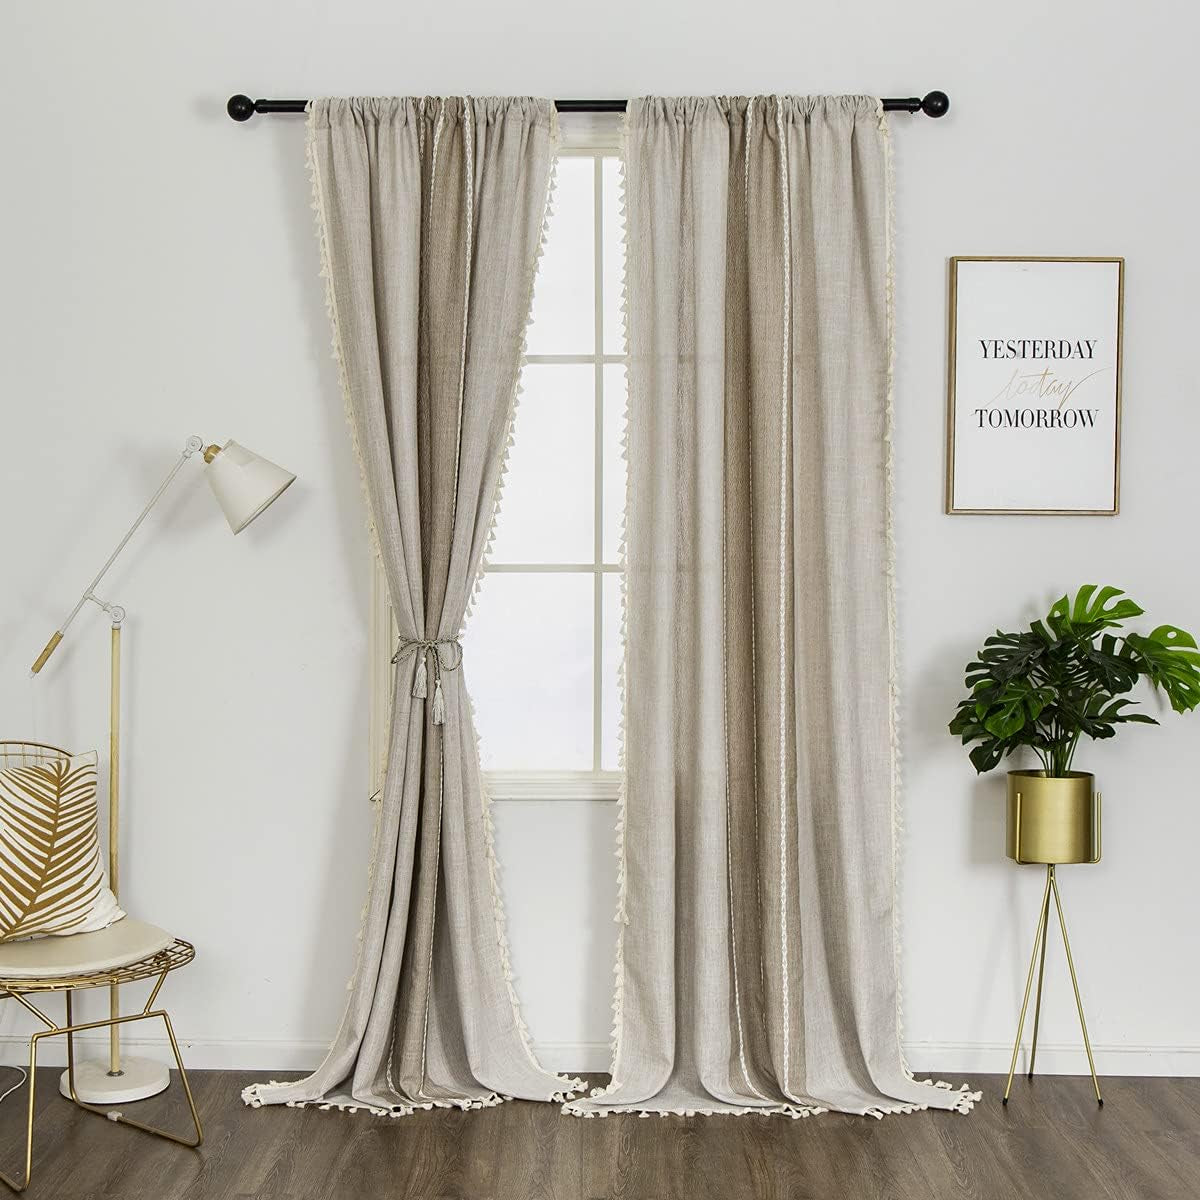 Amidoudou 1 Pair Cotton Linen Boho Curtains with Tassel, Farmhouse Curtains for Bedroom Living Room (Beige and Coffee, 2 X 54 X 96 Inch)  Amidoudou   